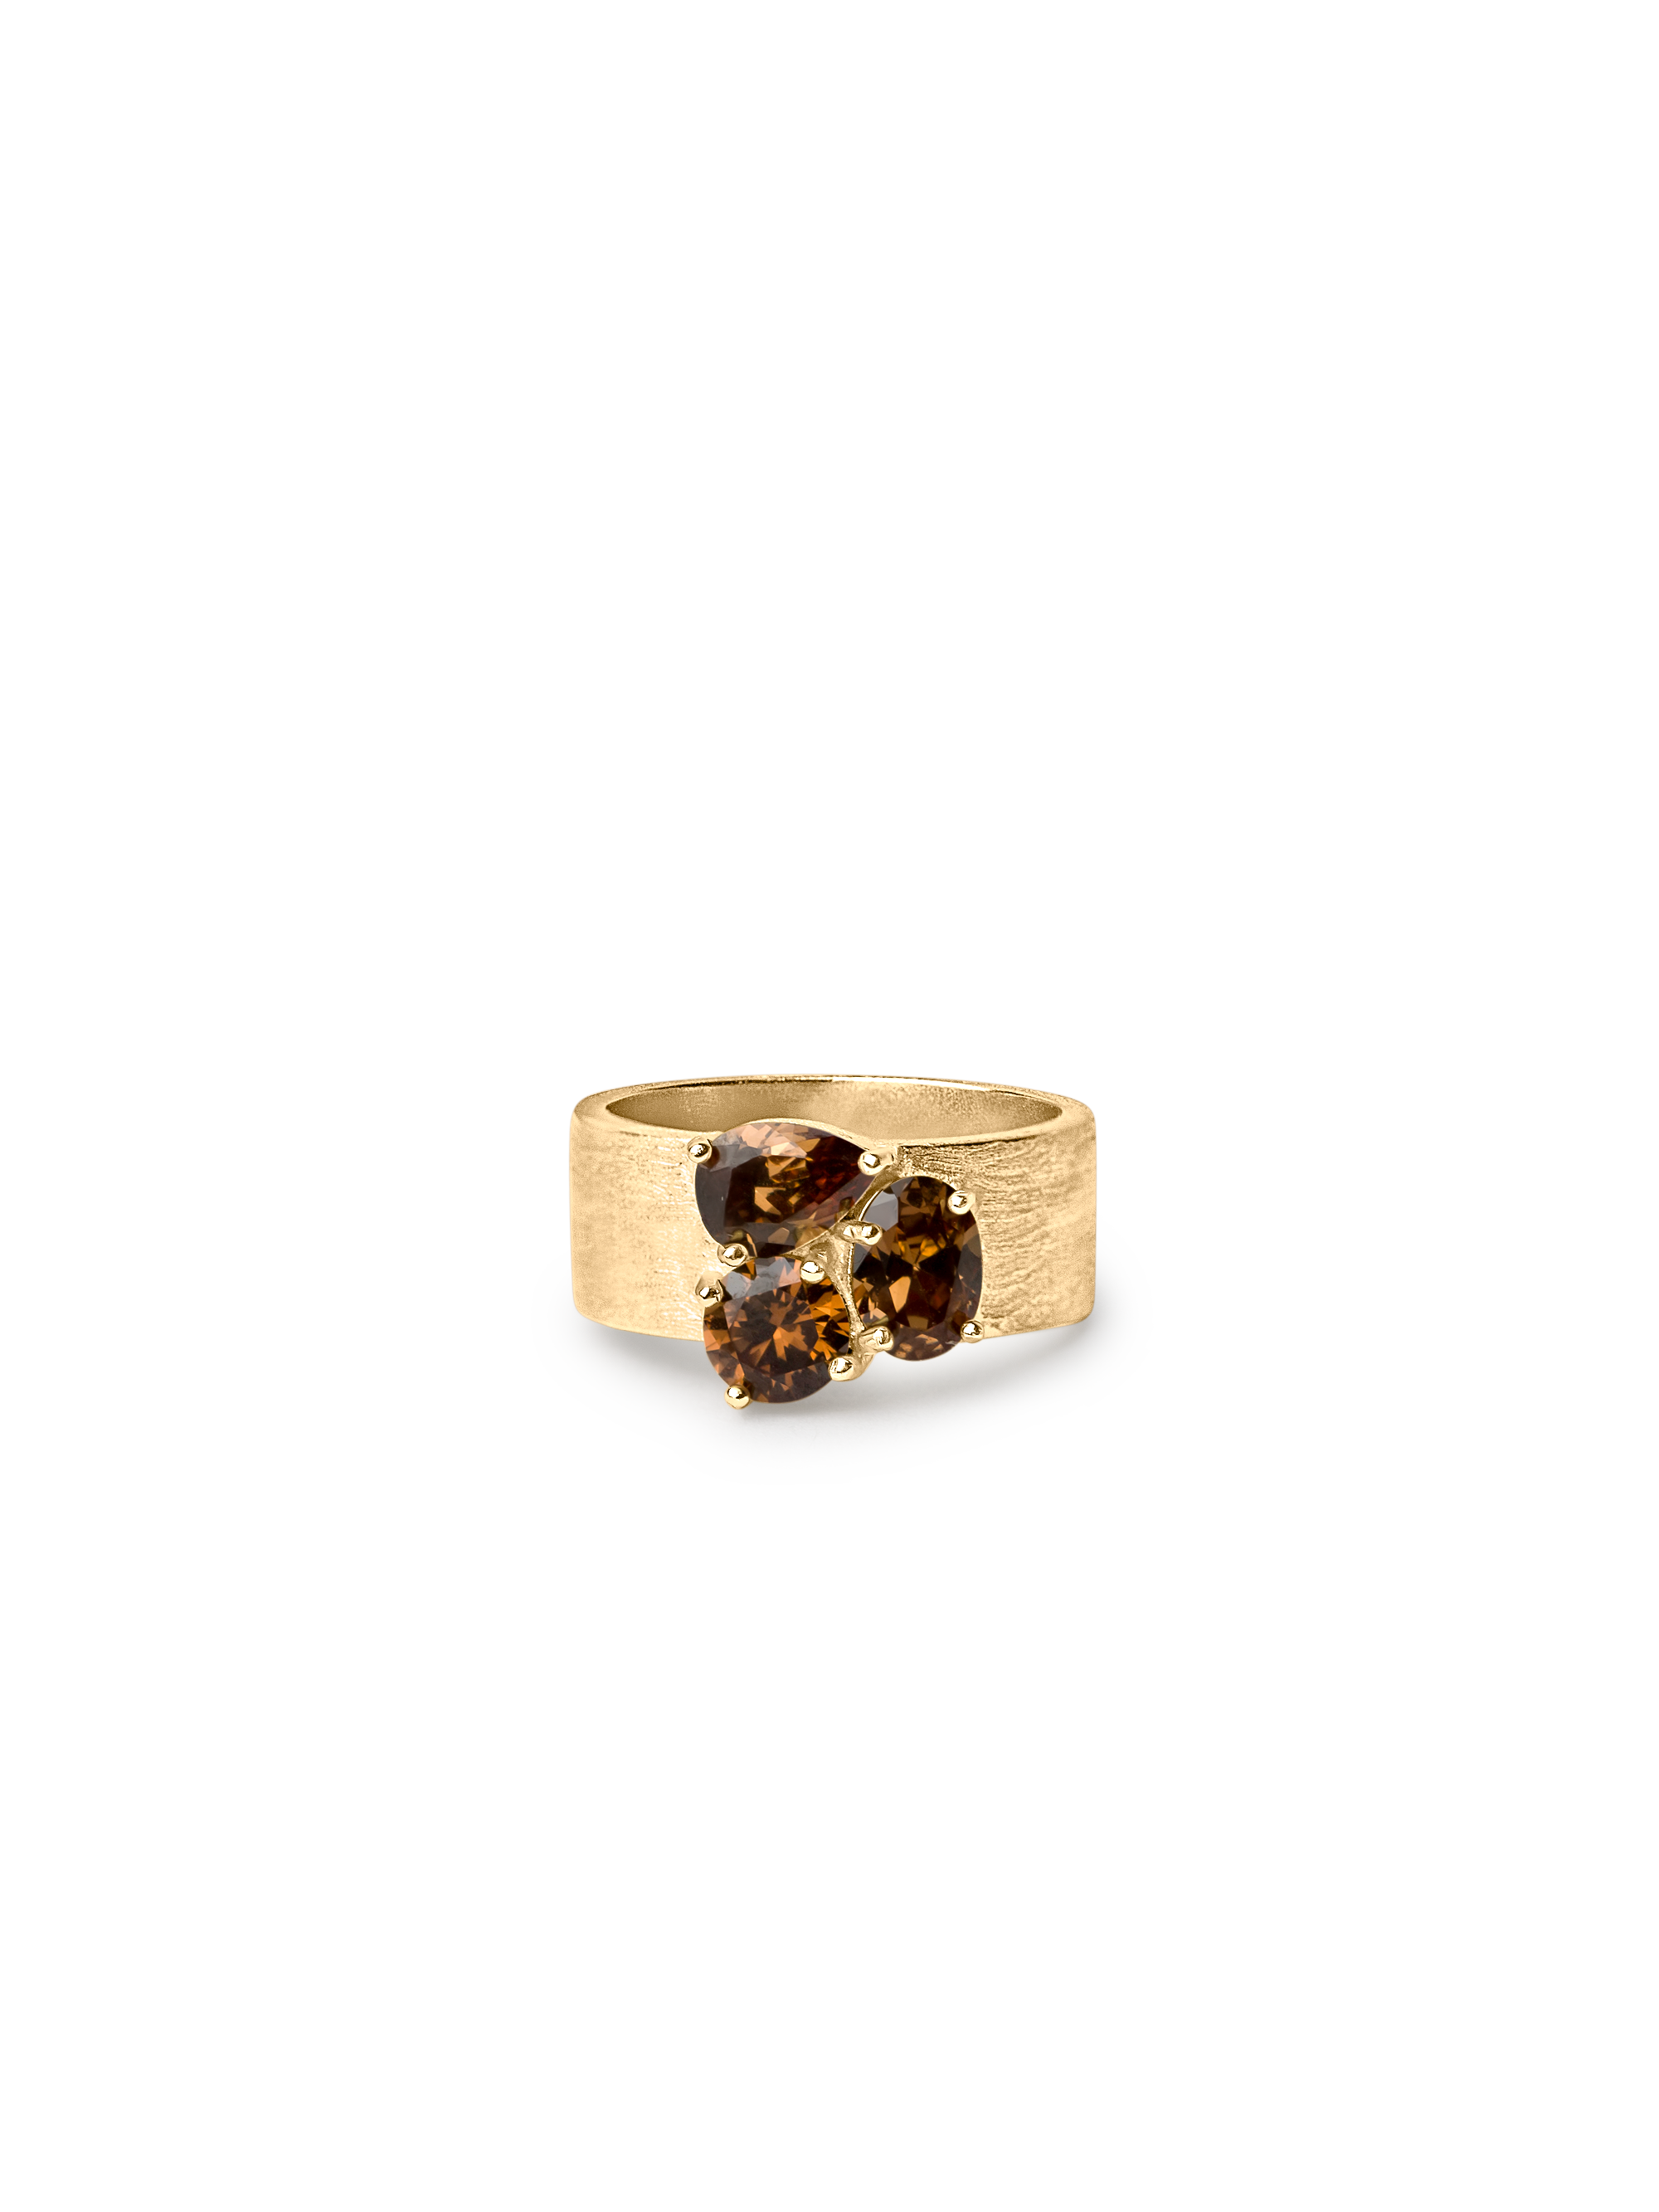 Grace Diamond Ring Brown by Felicia Wedin, 18k gold plated brass